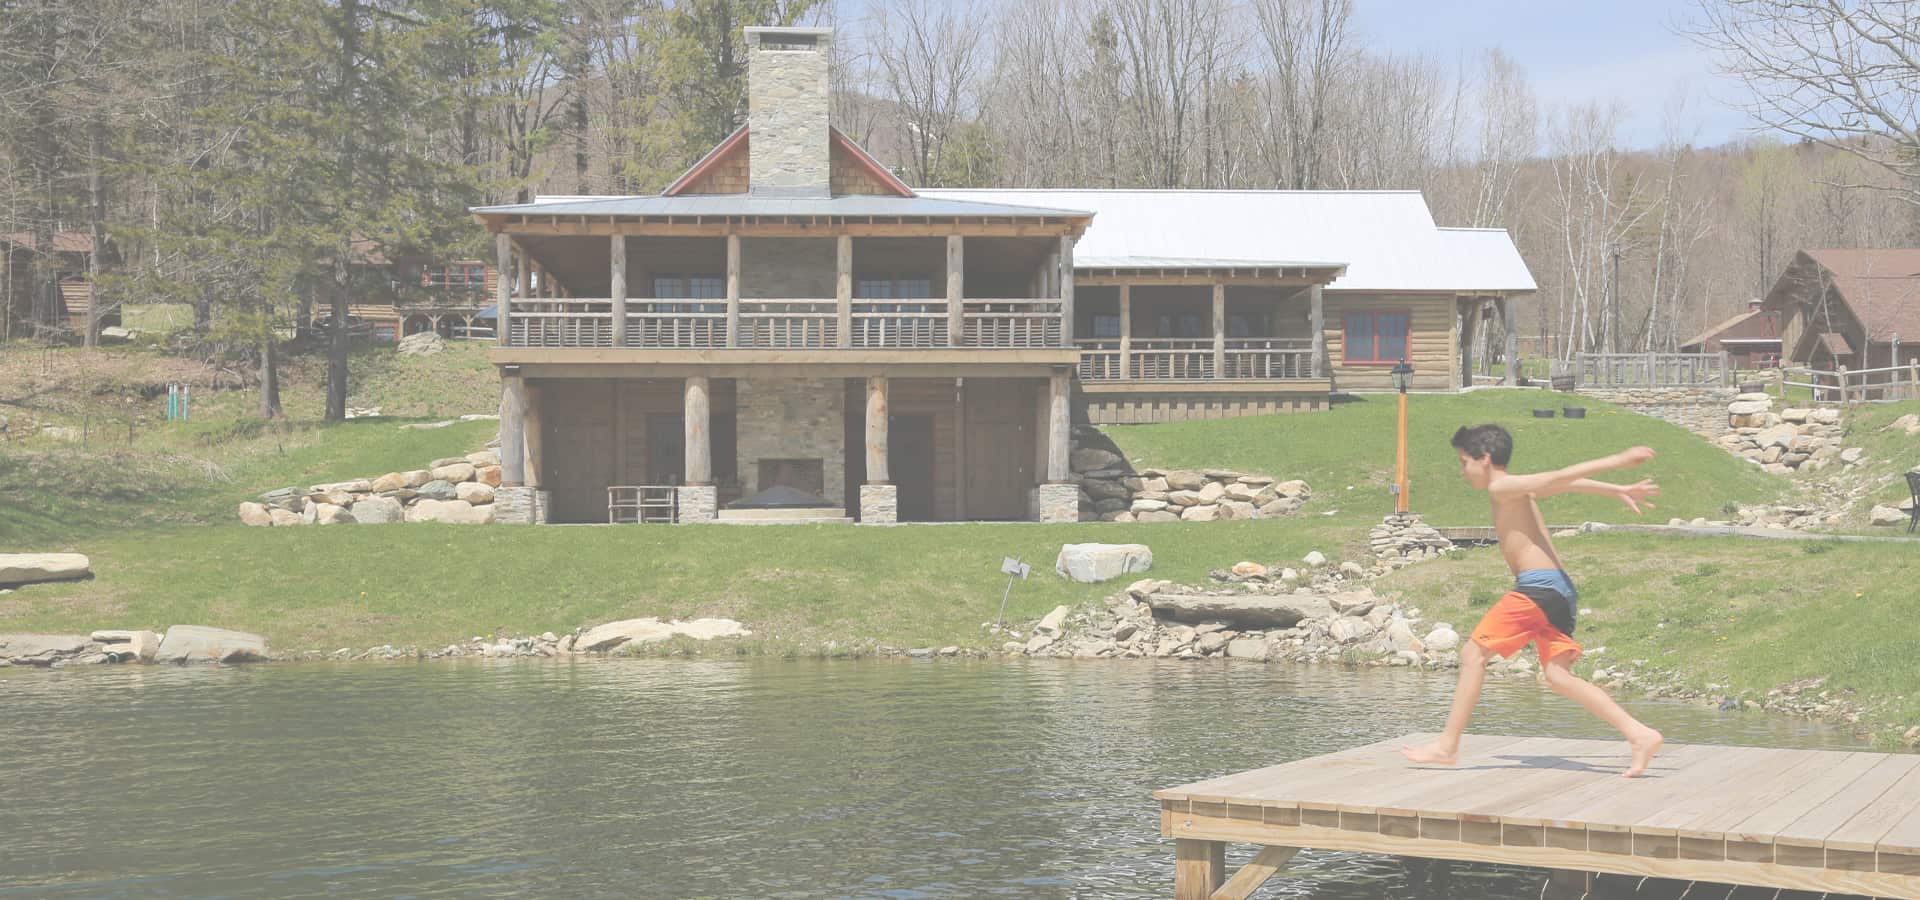 Seesaws Lodge - Summer Exterior with Boy on Dock jumping into pond